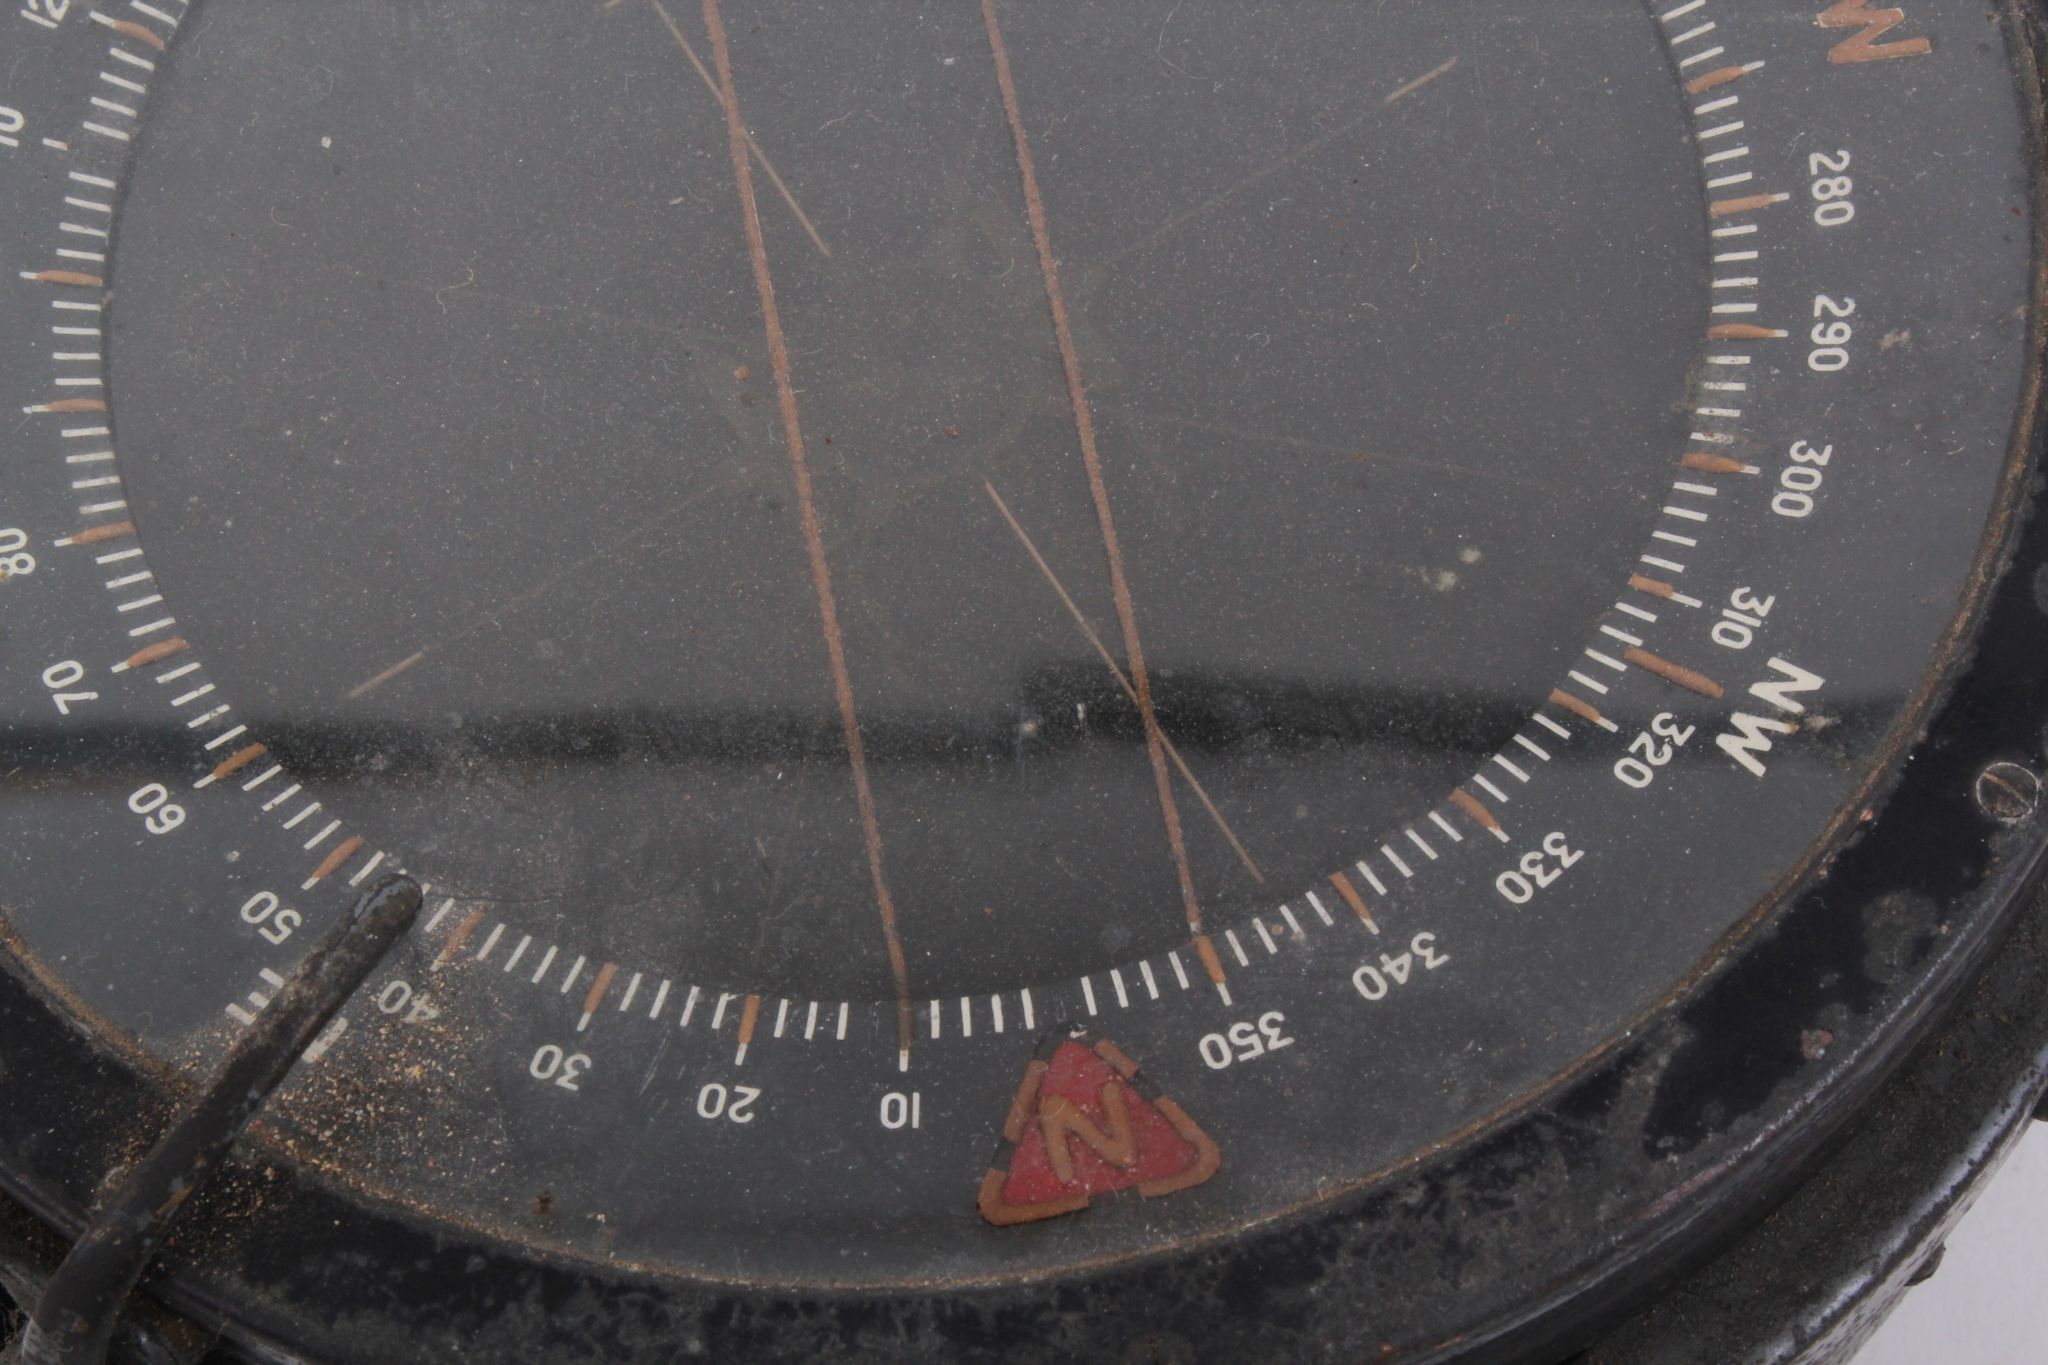 RAF WW2 aeroplane compass, type P11 as used in Spitfire and Hurricane planes, aperture approx. 9.2cm - Image 6 of 7